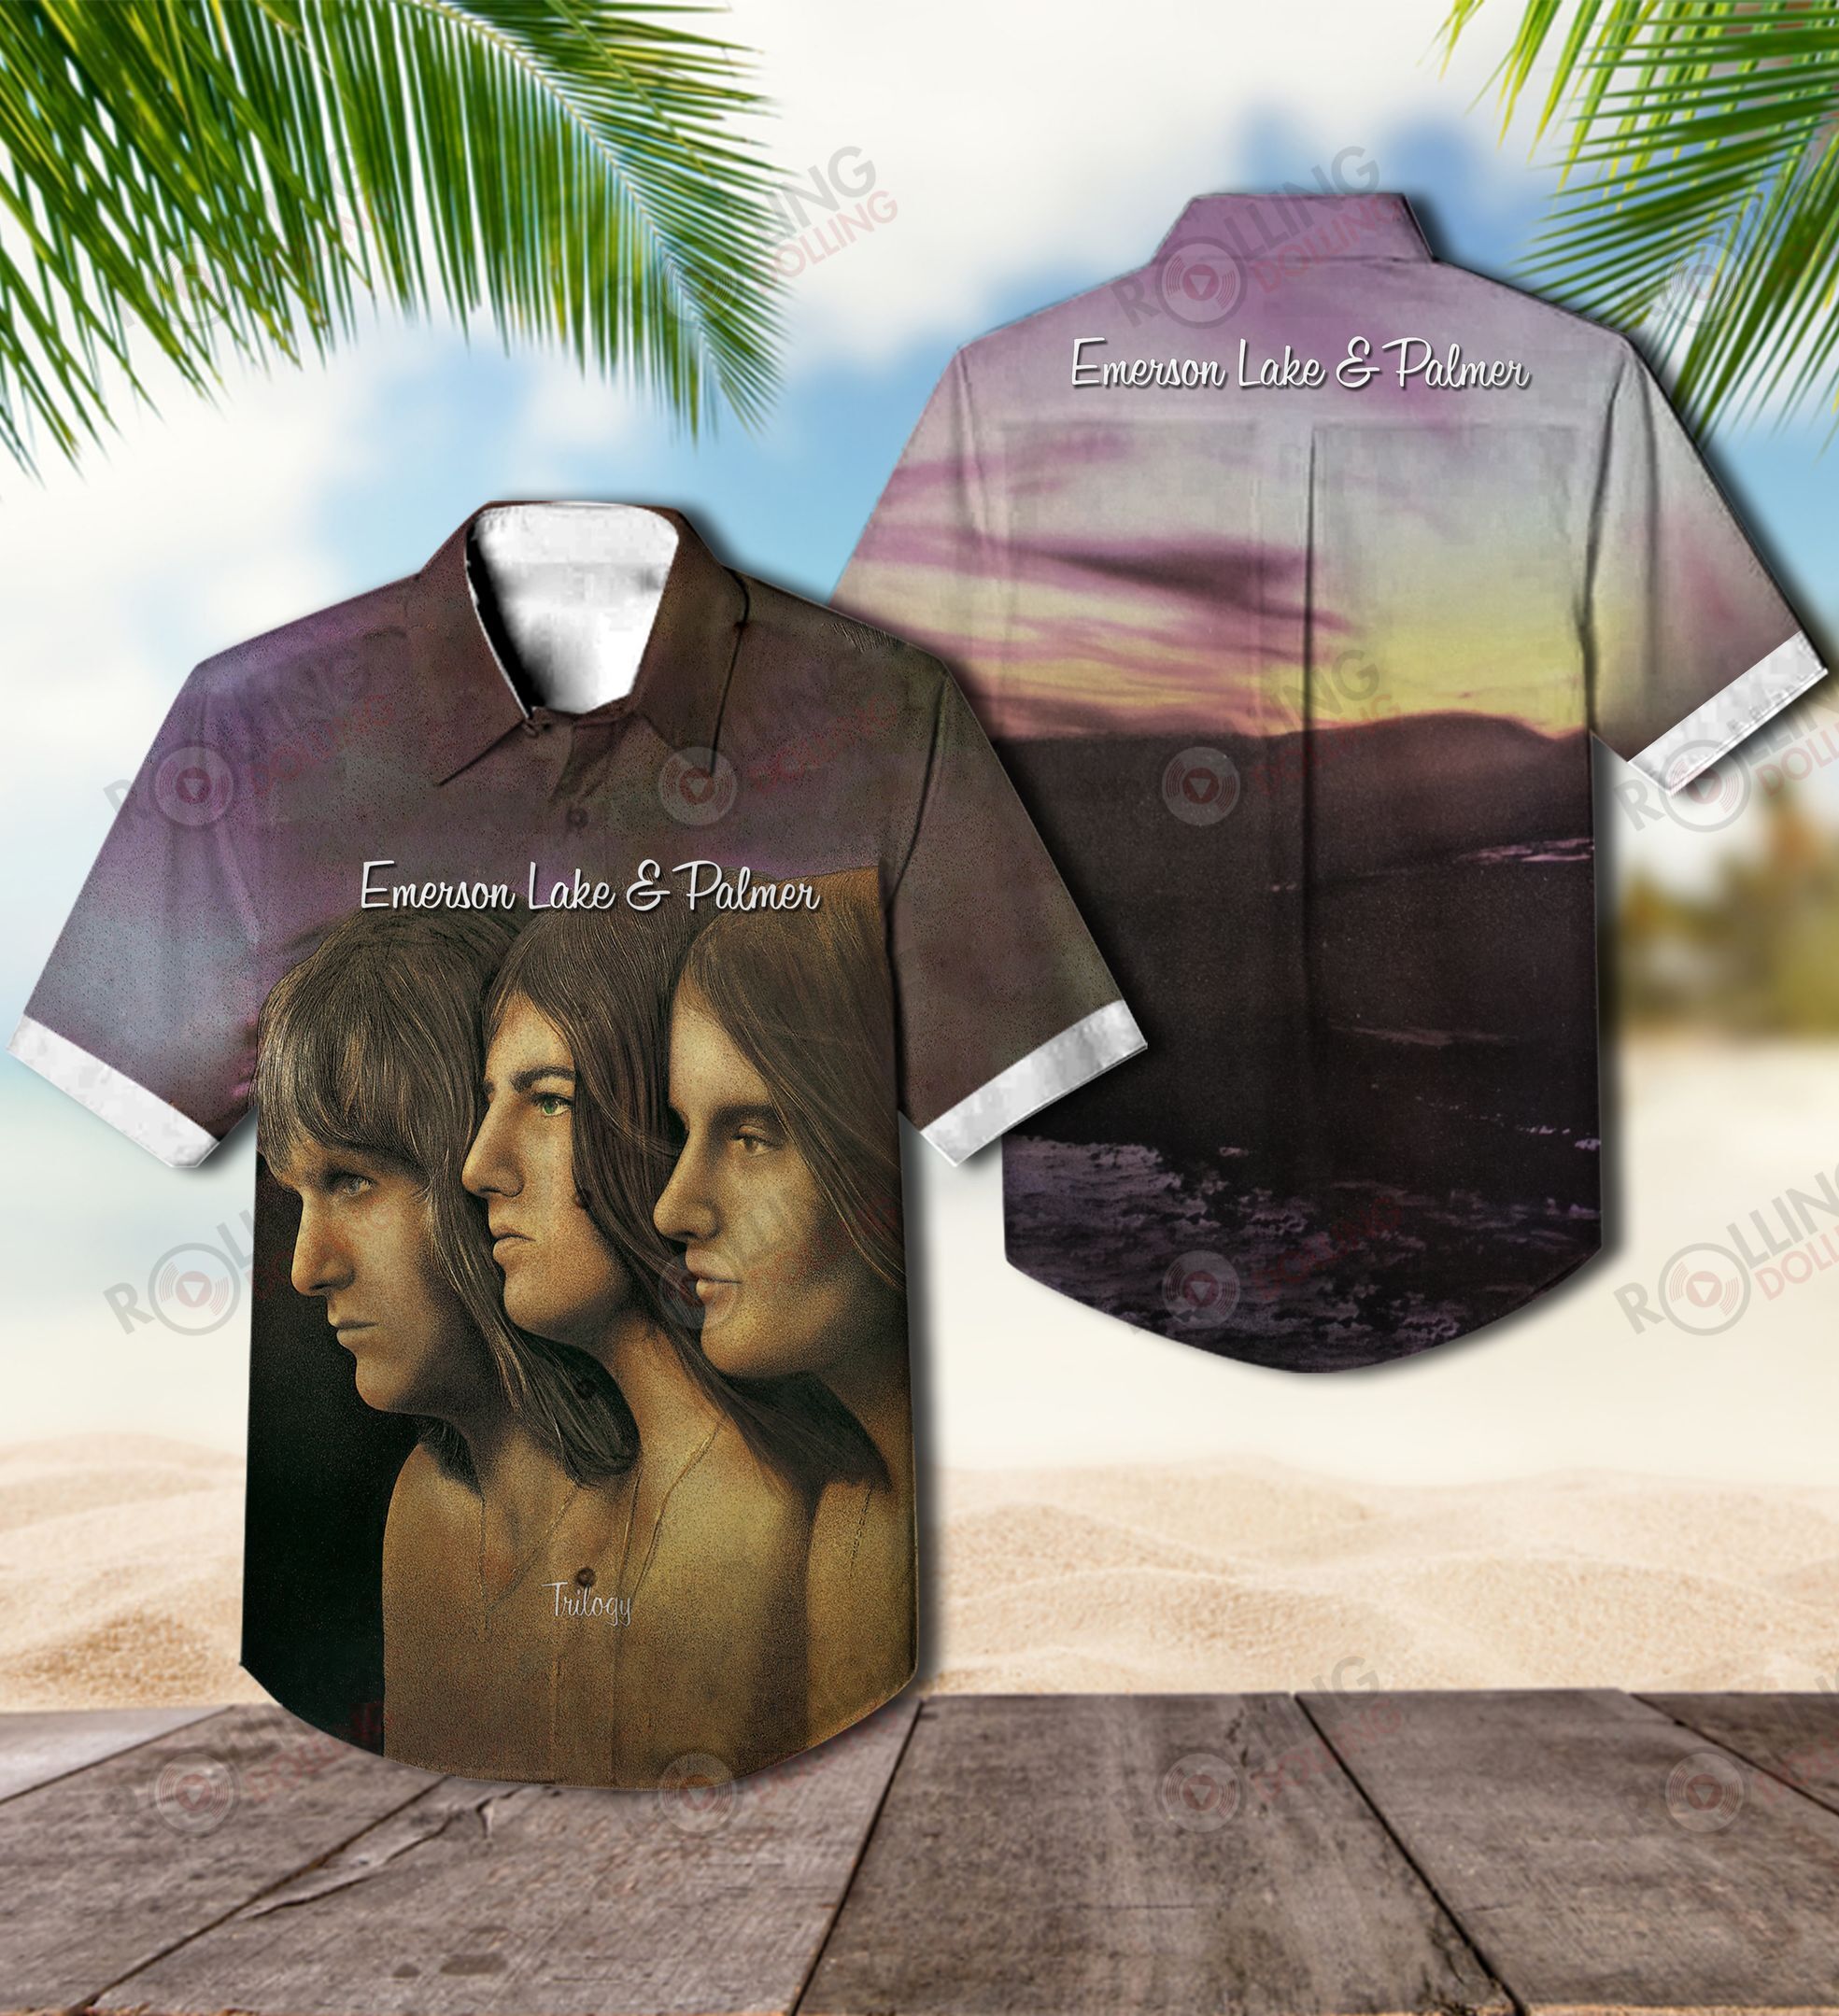 This would make a great gift for any fan who loves Hawaiian Shirt as well as Rock band 48